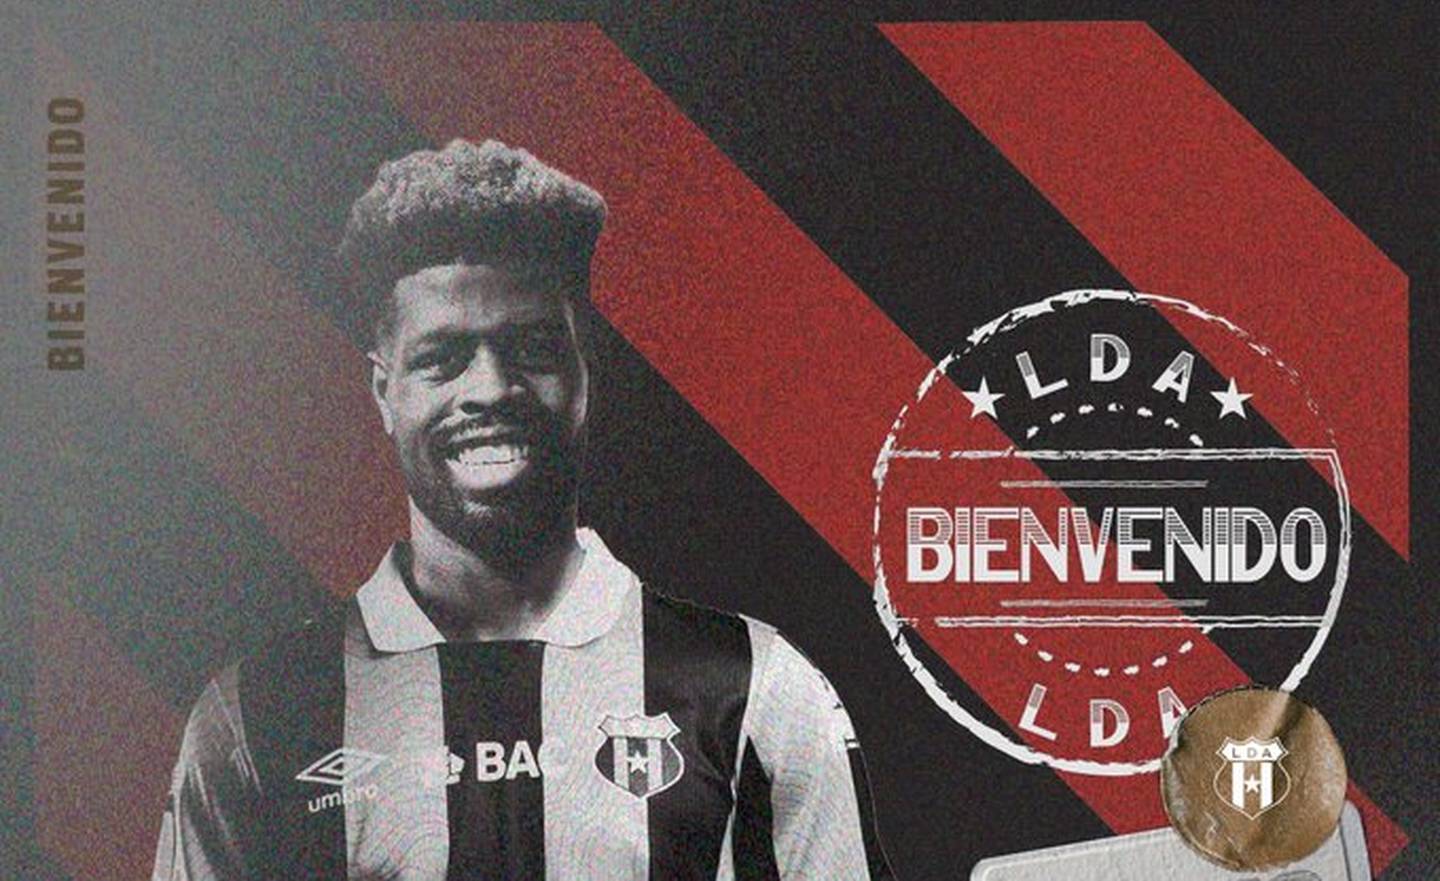 Alajuelense hired a great player nominated for the best defense of the year in Canada